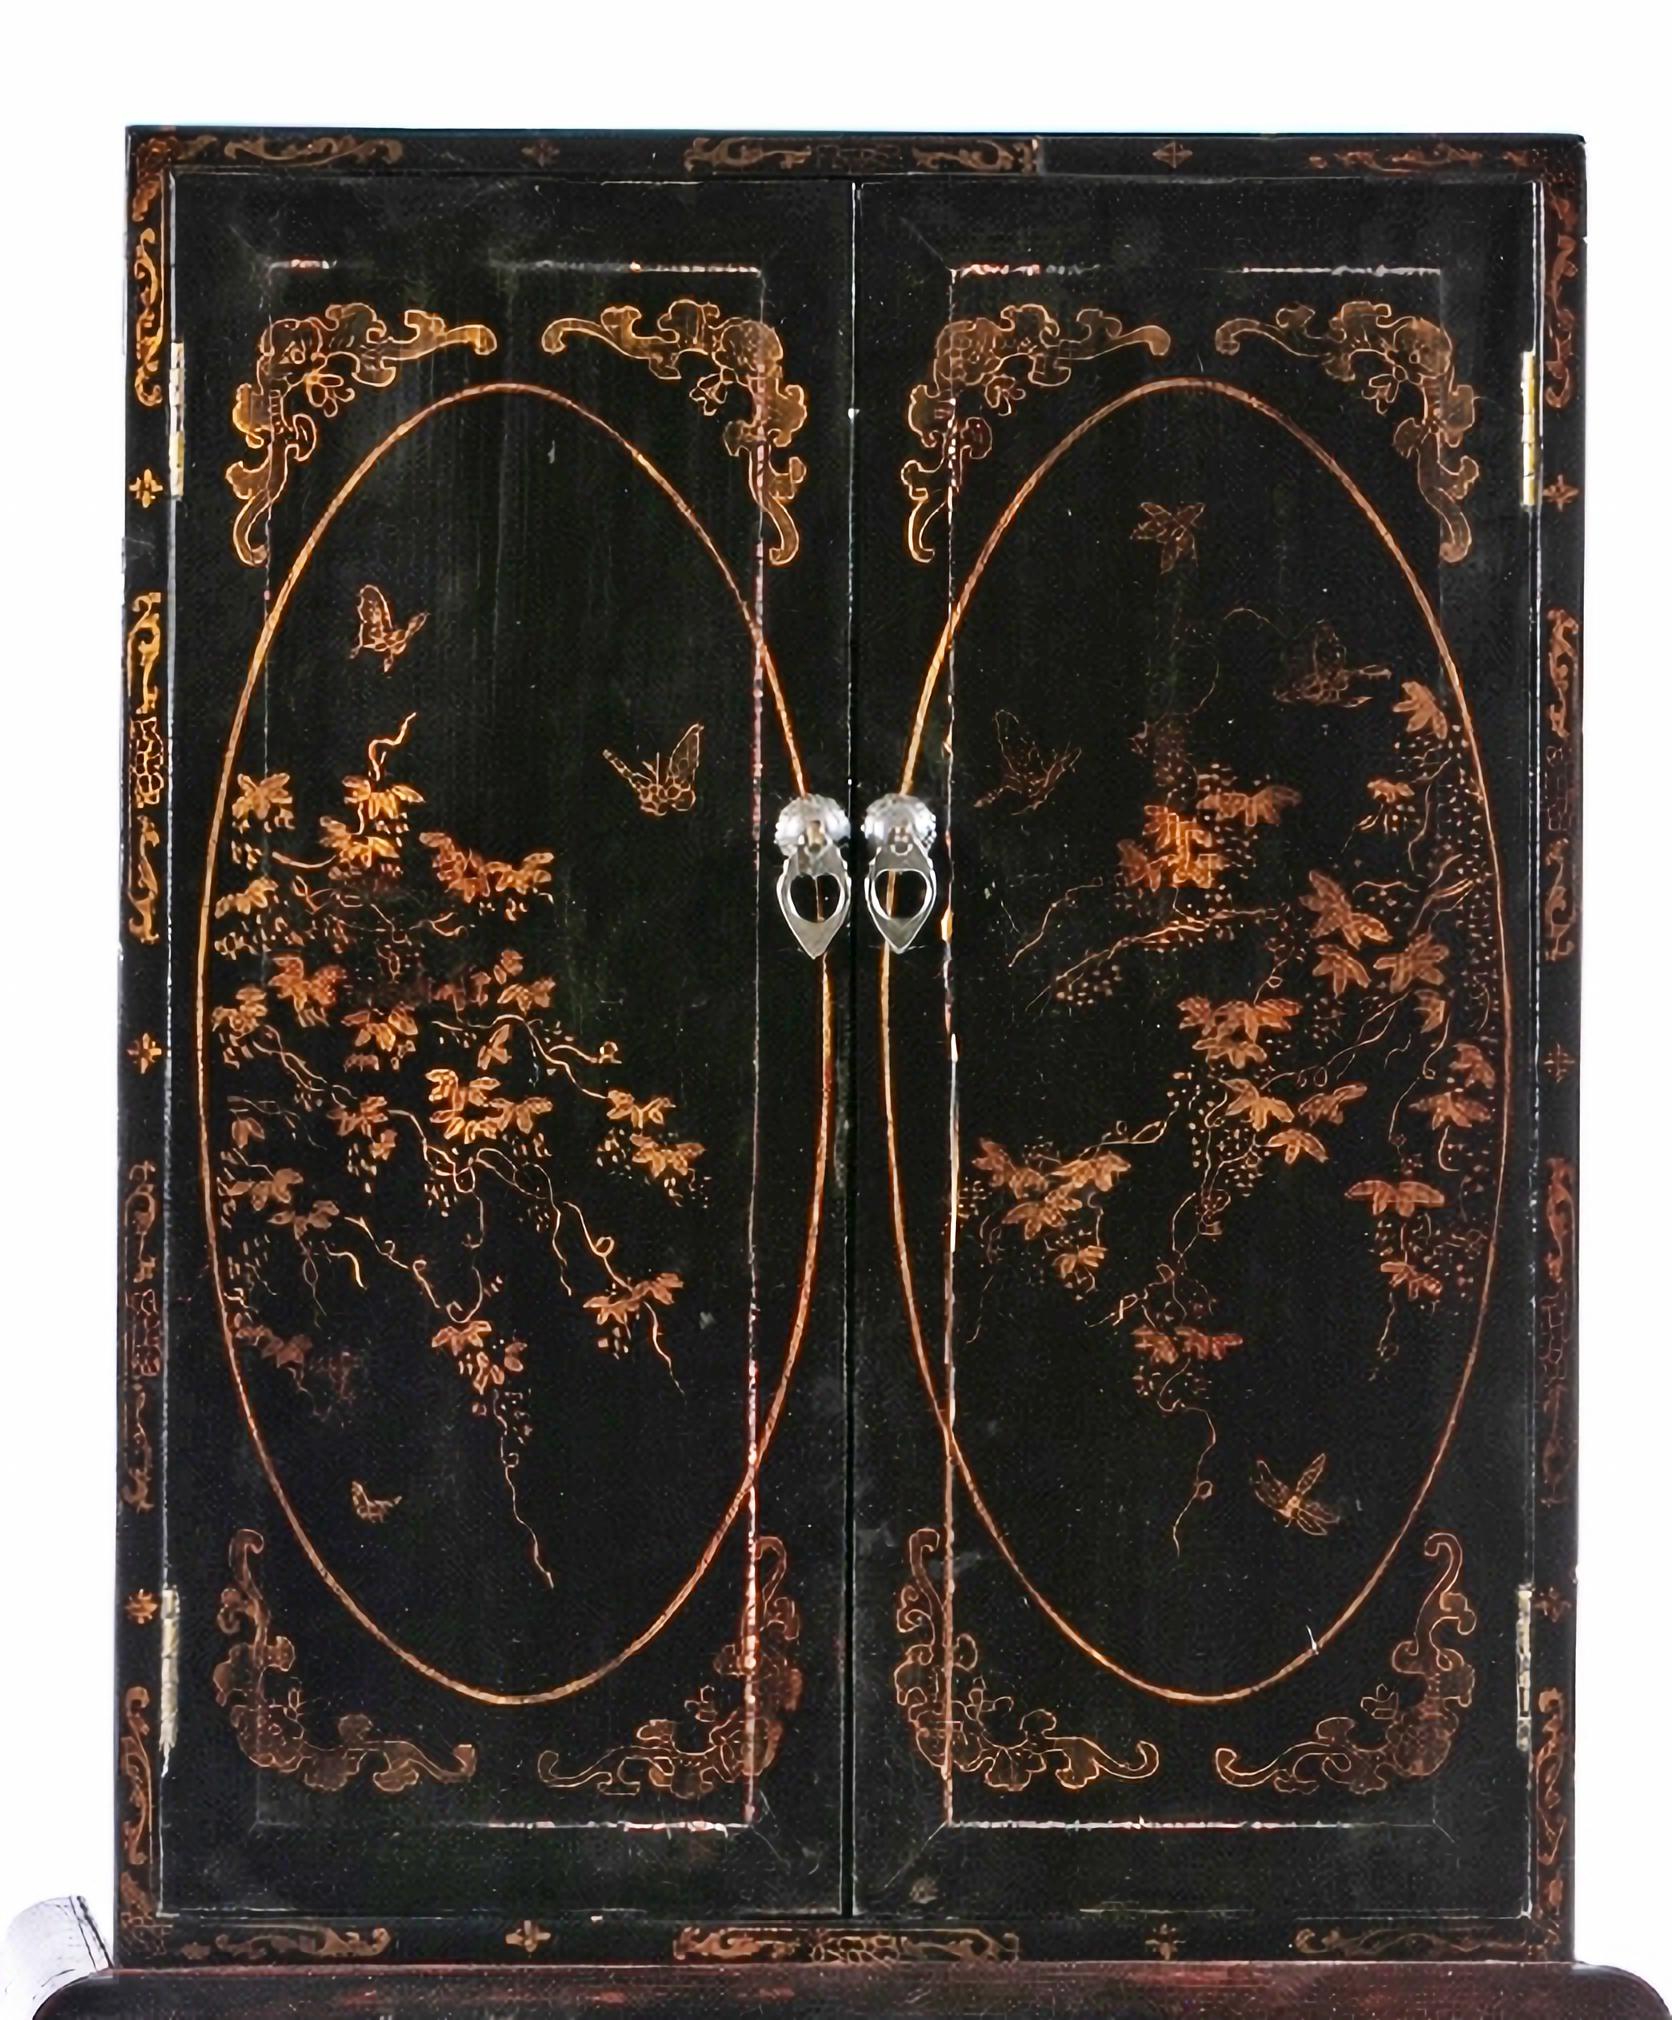 PAIR OF CHINESE CABINETS 19th Century

Of export
19th century in black lacquered wood with gilt representing plant motifs. 
Upper body with two doors, lower body notched and hollowed out. 
Small defects. 
Dim.: 168 x 69 x 41 cm.
very good condition